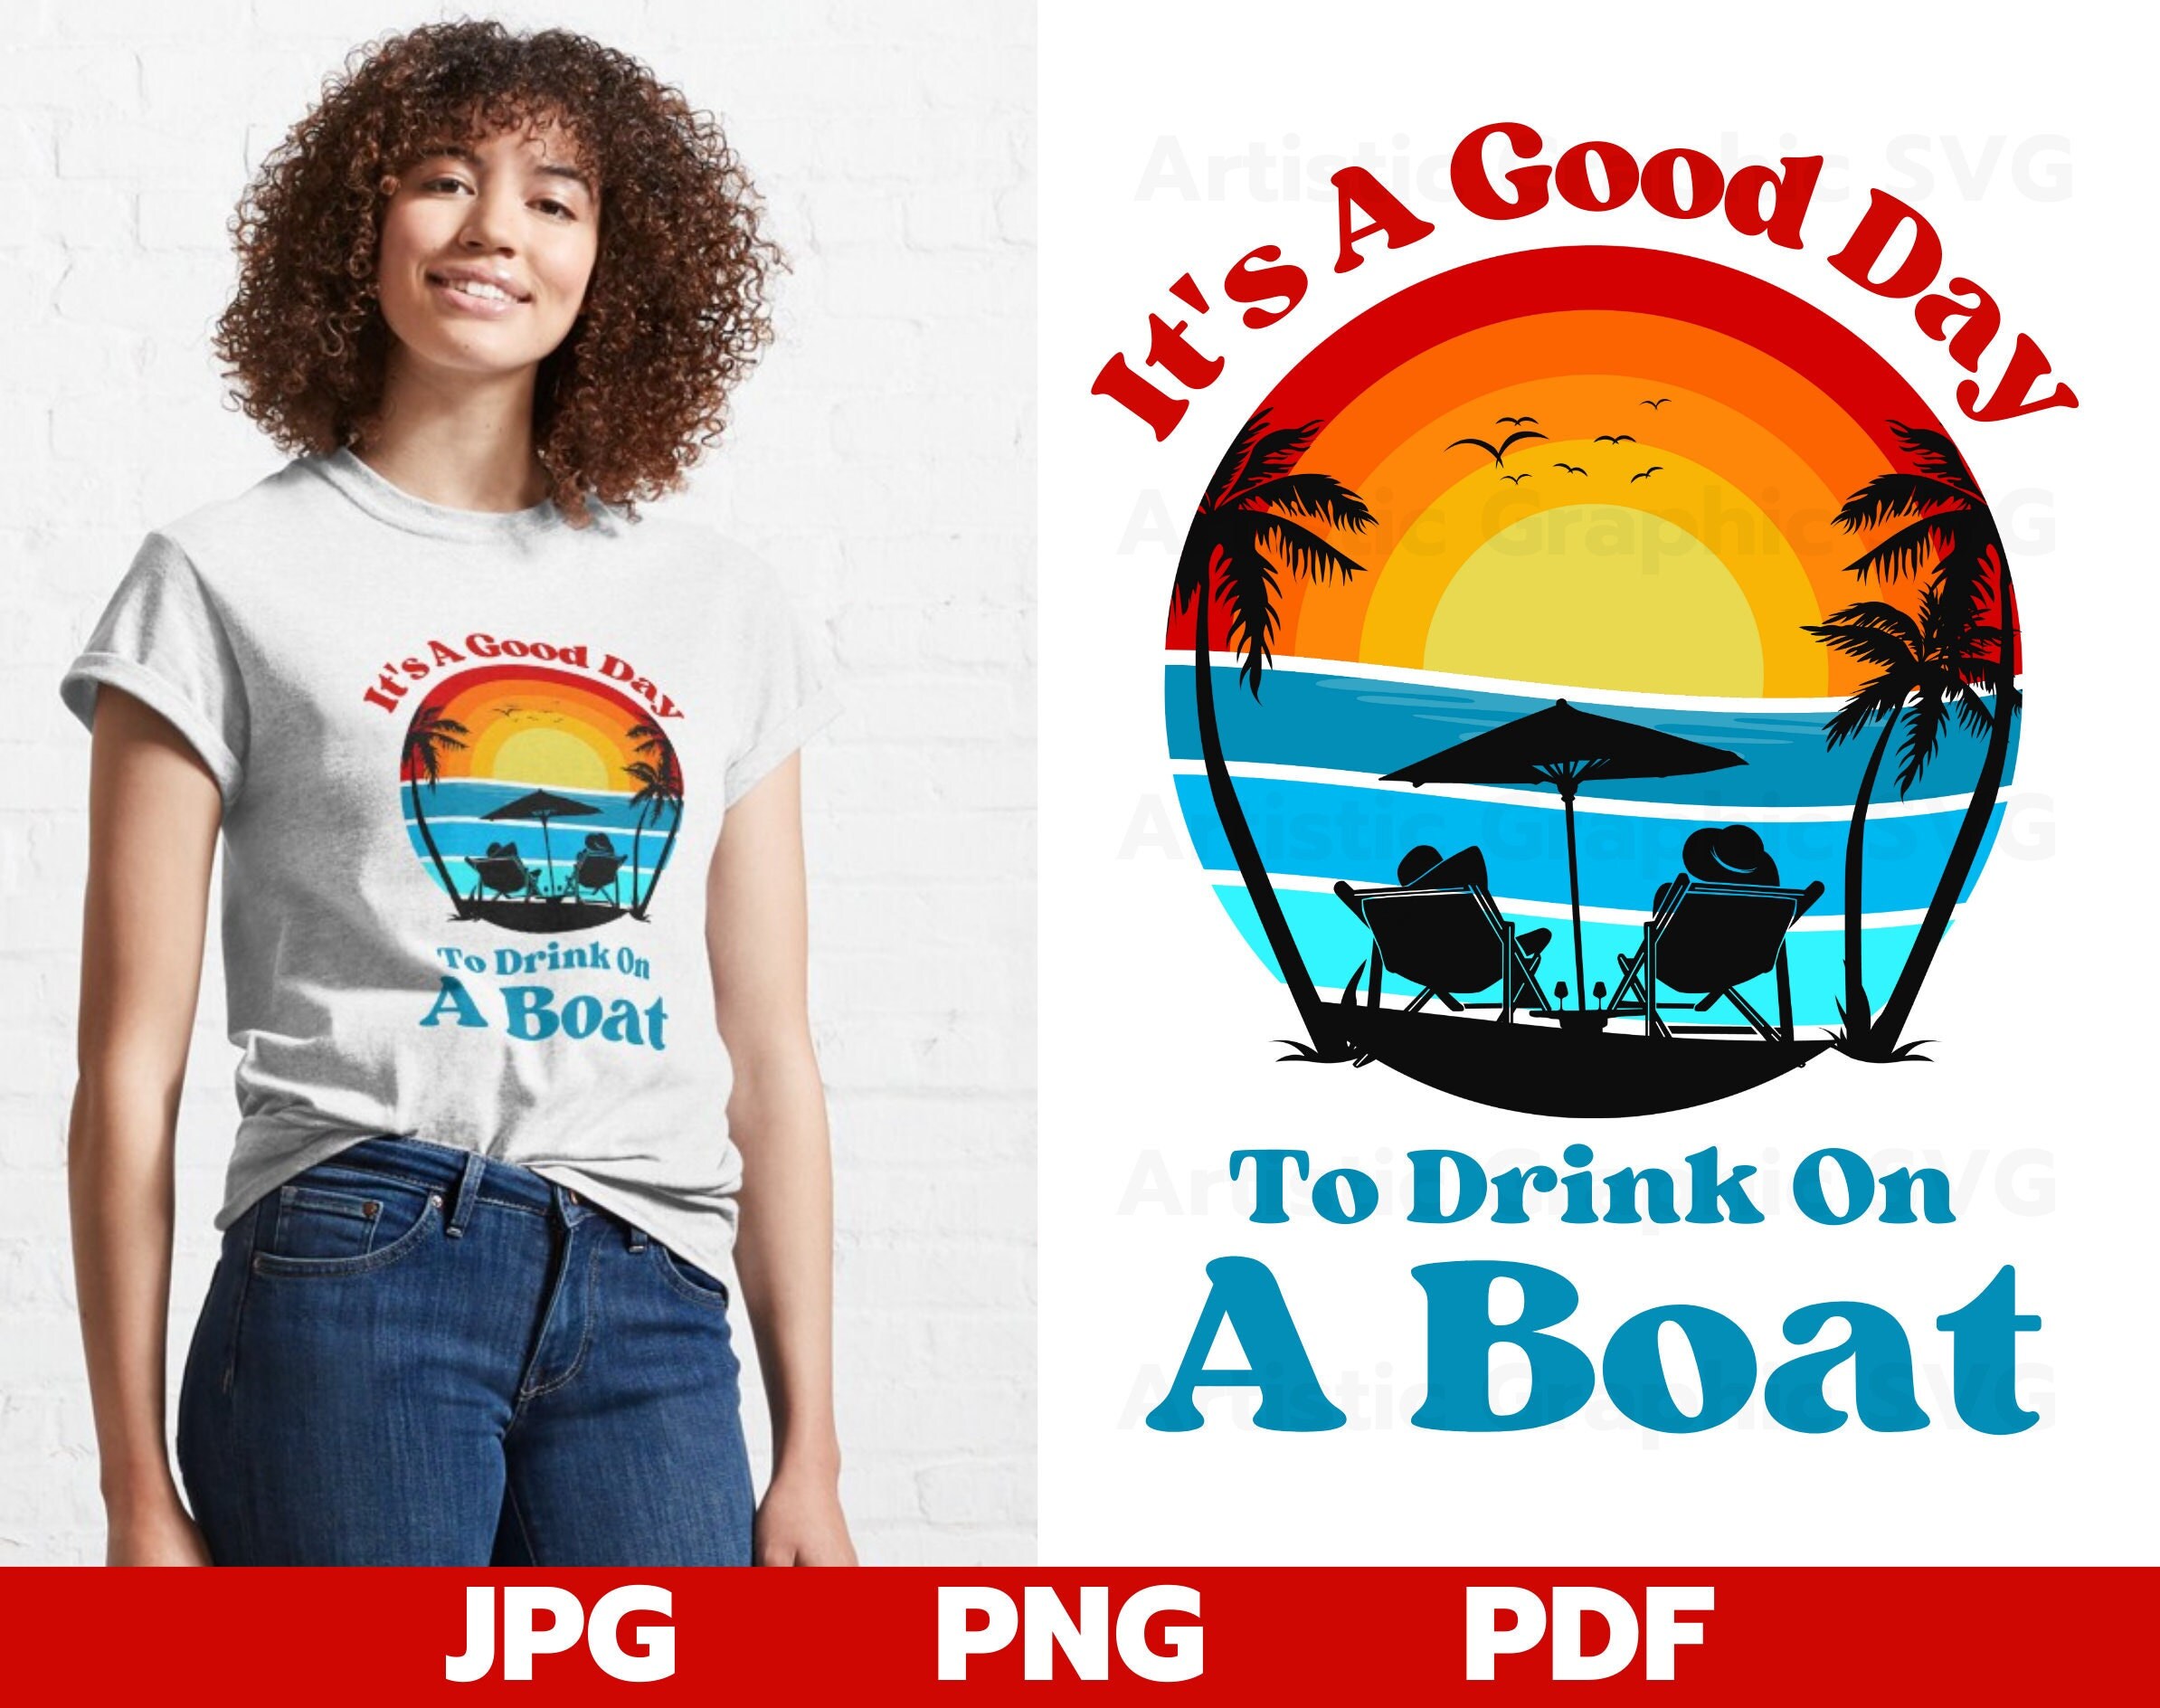 It's A Good Day to Drink on A Boat Png Boat Cruise - Etsy